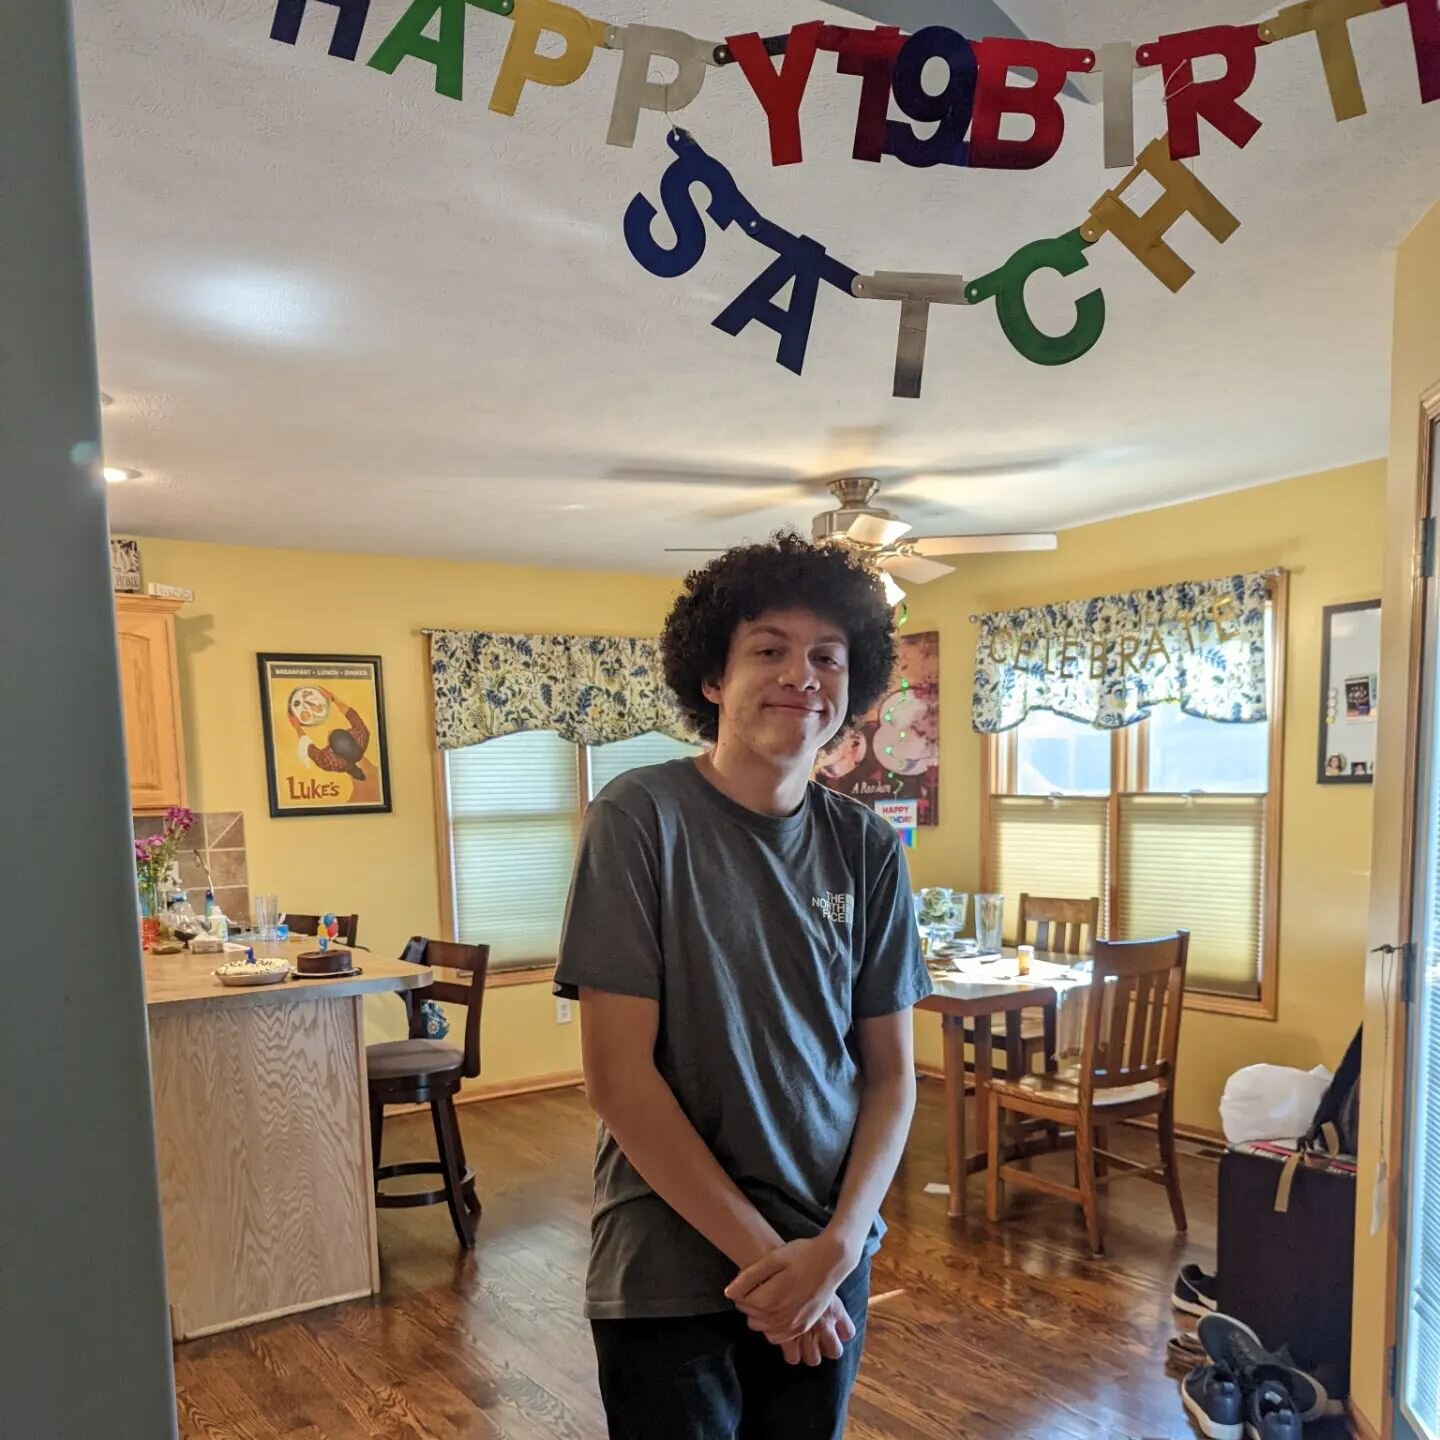 Happy 19th birthday Satchel!  It's been fun to watch you use your creativity this summer to learn and grow. I'm so proud of the young man you're becoming.